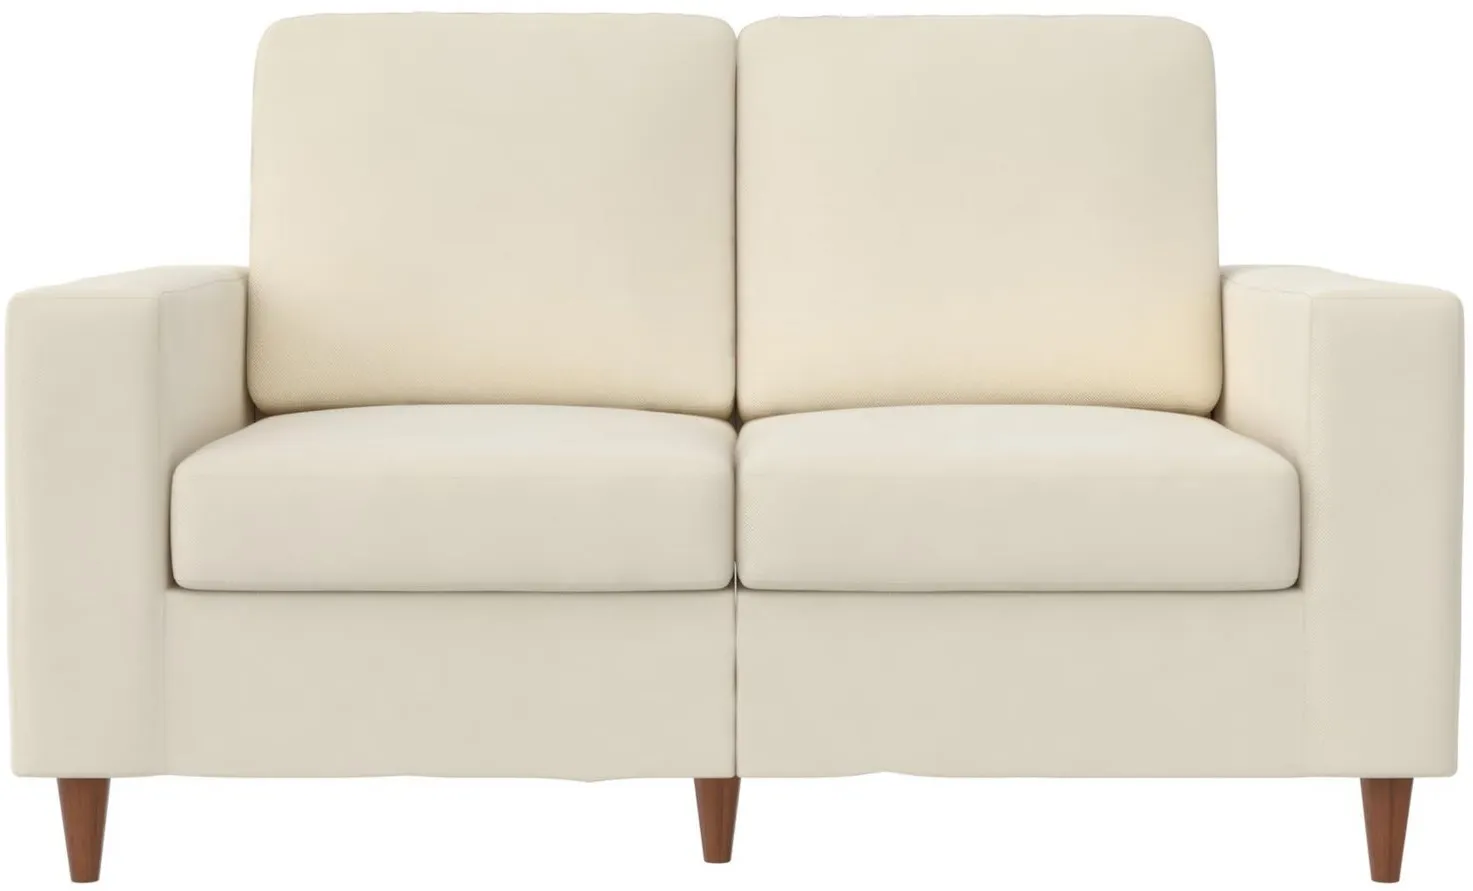 Zion Loveseat in Ivory by DOREL HOME FURNISHINGS